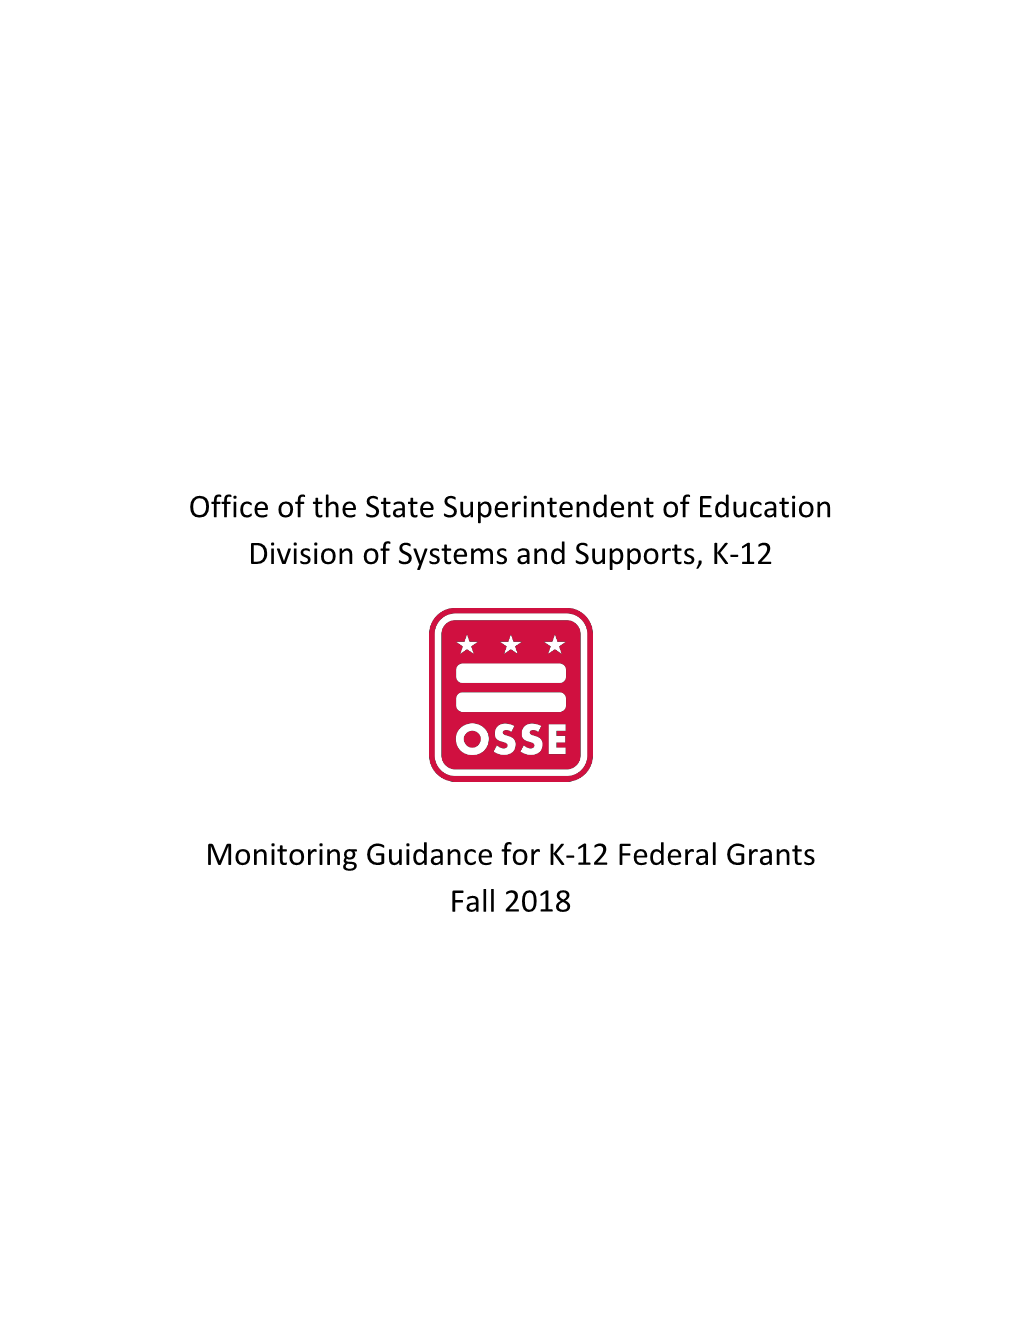 2018-19 Monitoring Grant Guidance for K-12 Federal Grants and Tool